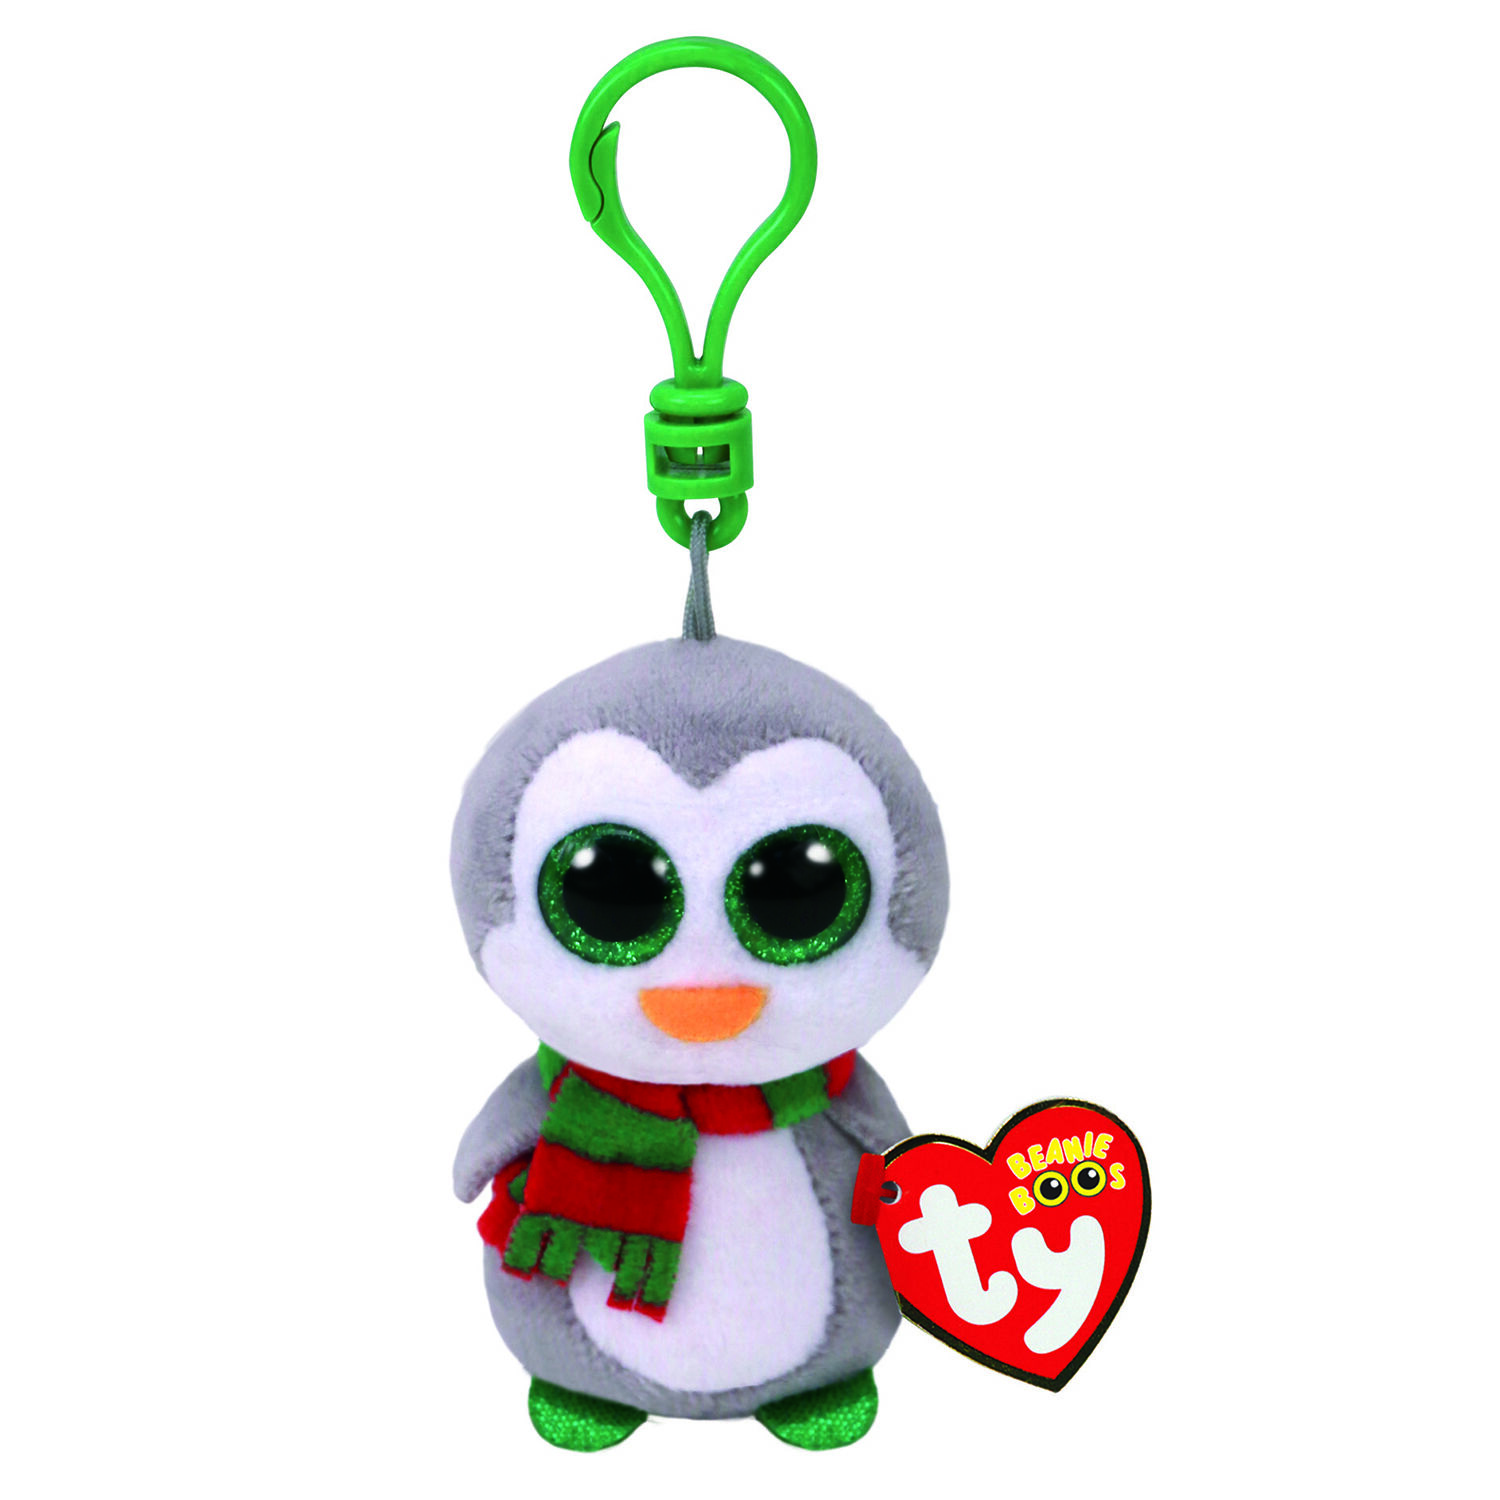 TY BEANIE BOOS OLIVE the PENGUIN CLAIRE'S EXCLUSIVE MINT with MINT TAG 